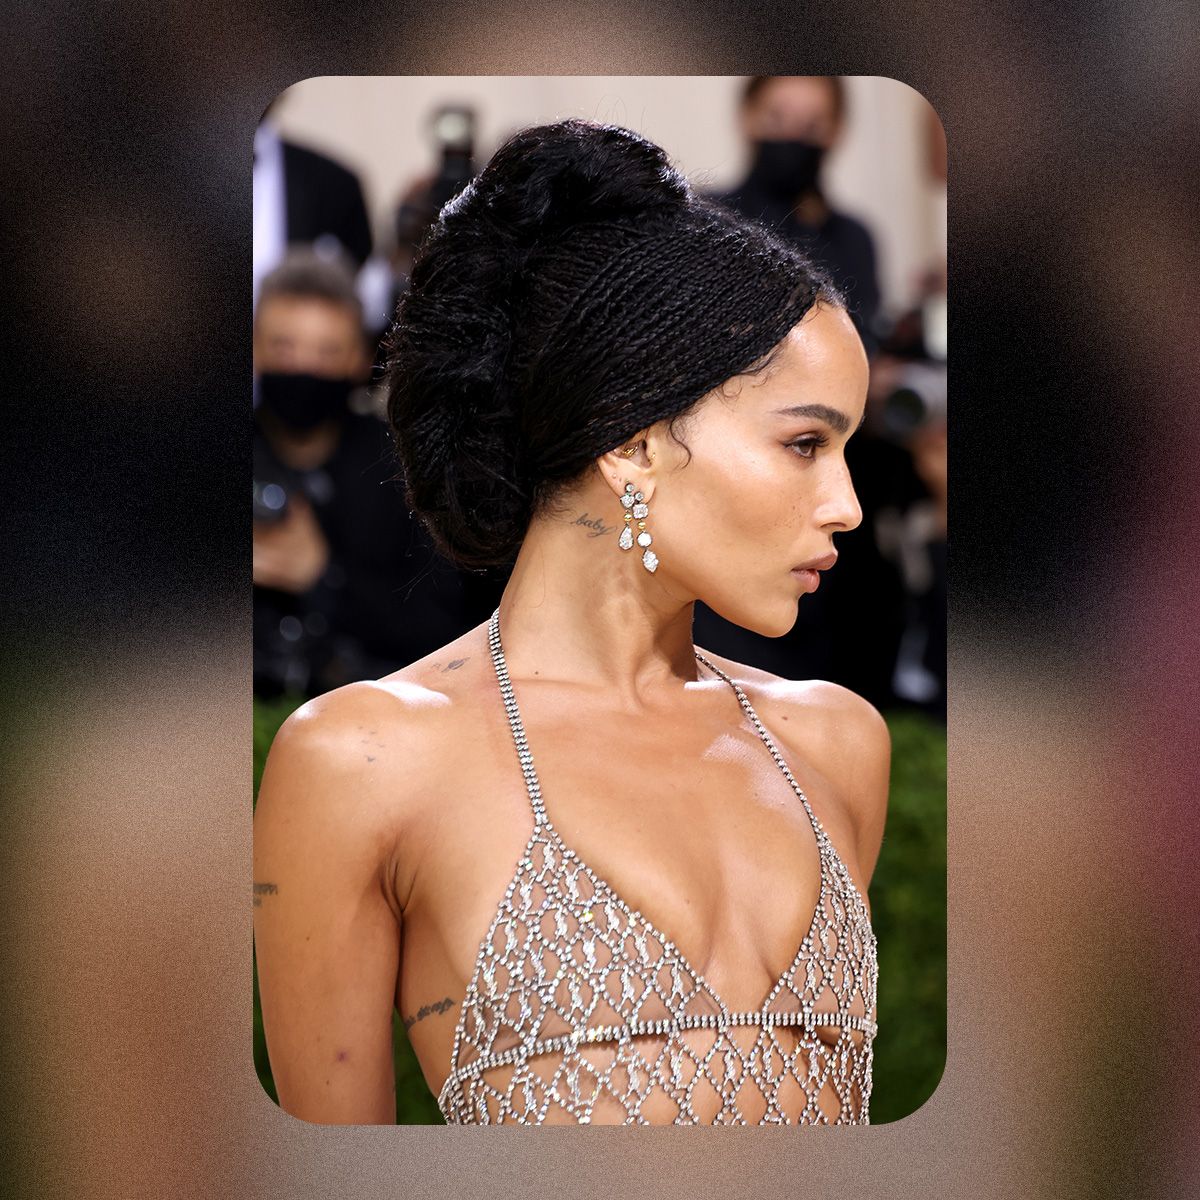 Here are five of our favorite hairstyles from Zoë Kravitz